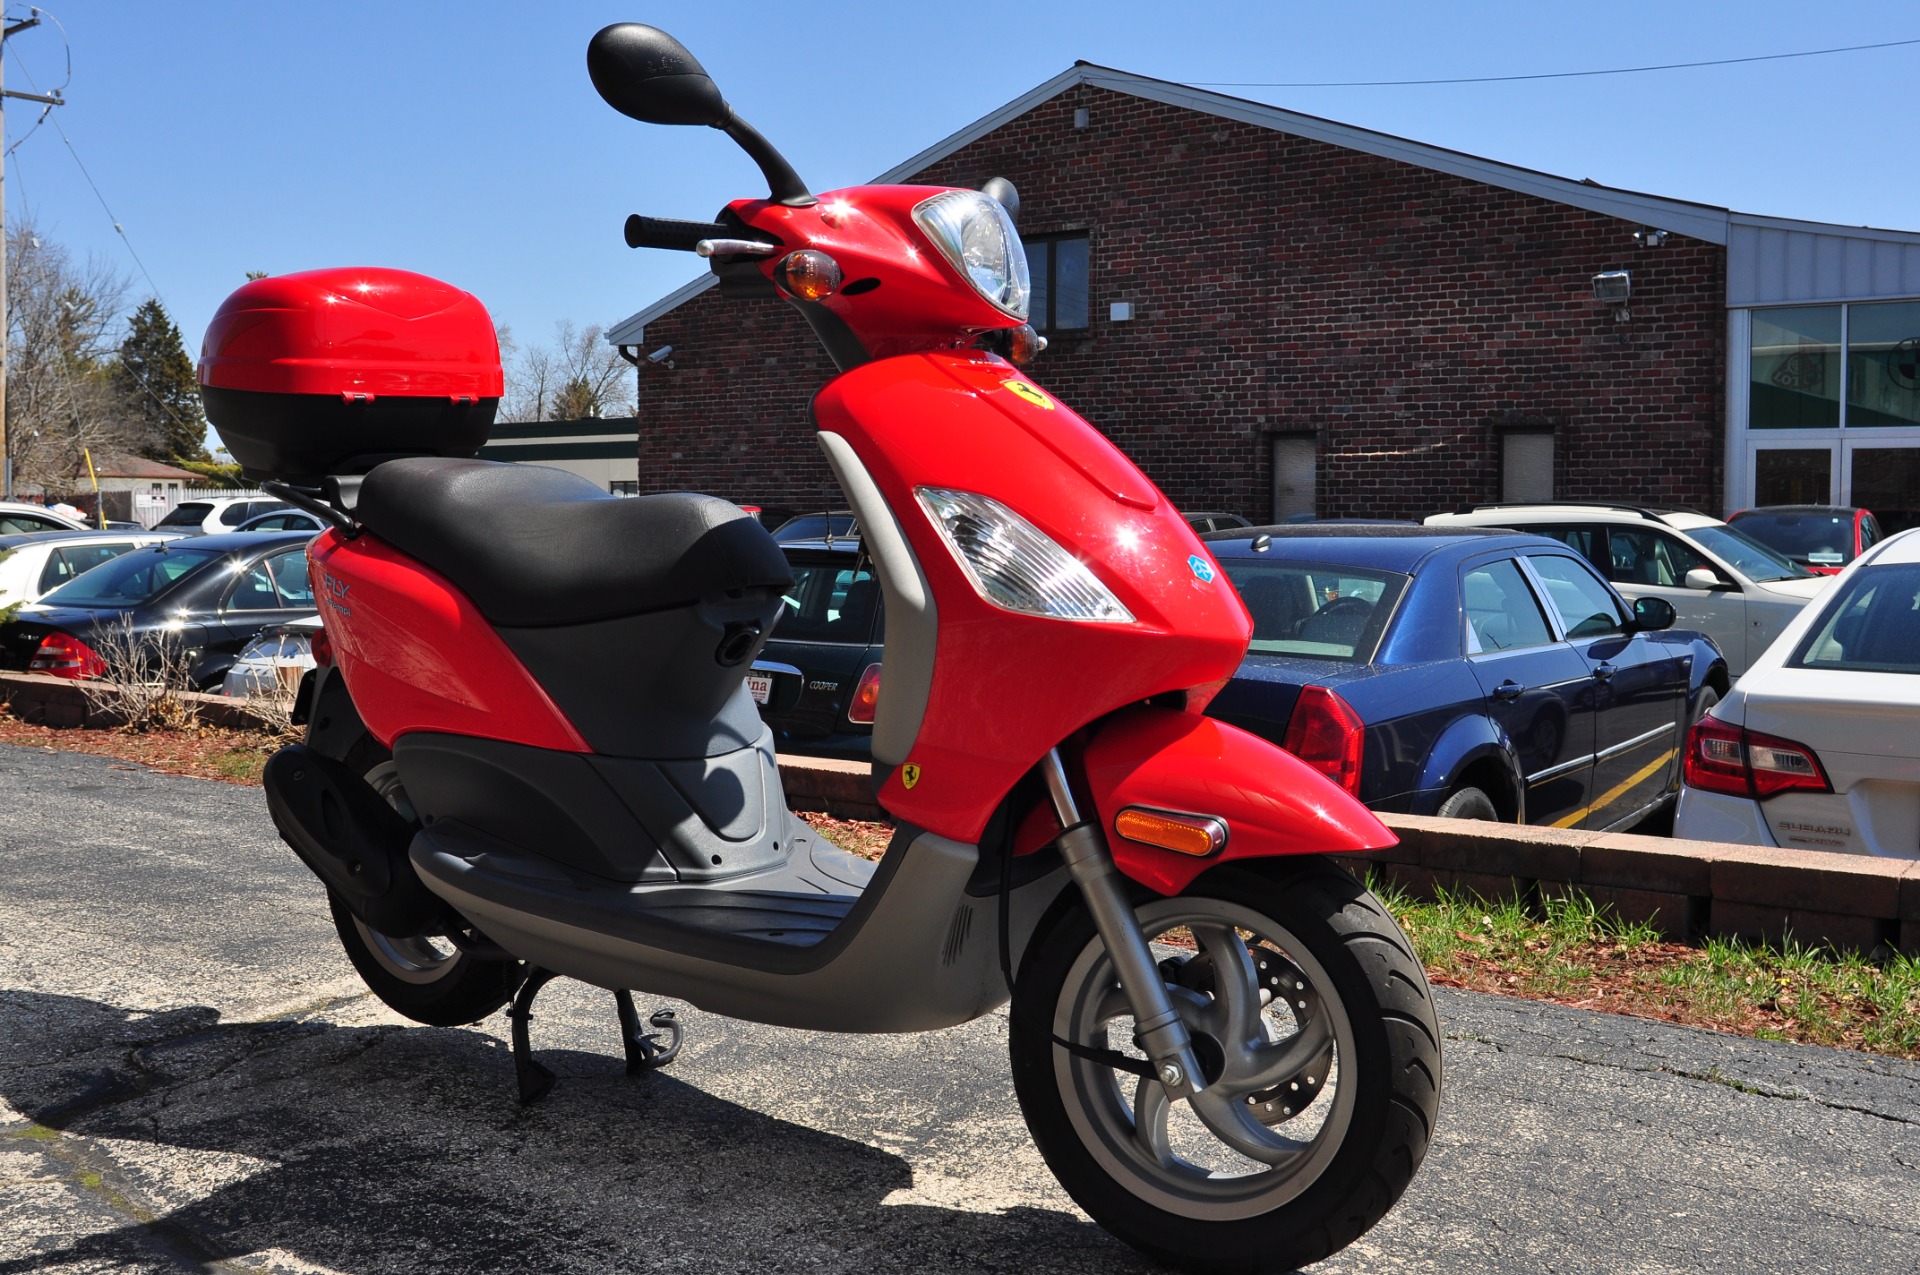 2008 Piaggio Fly 50 Stock # 9322 for sale near Brookfield, WI | WI ...